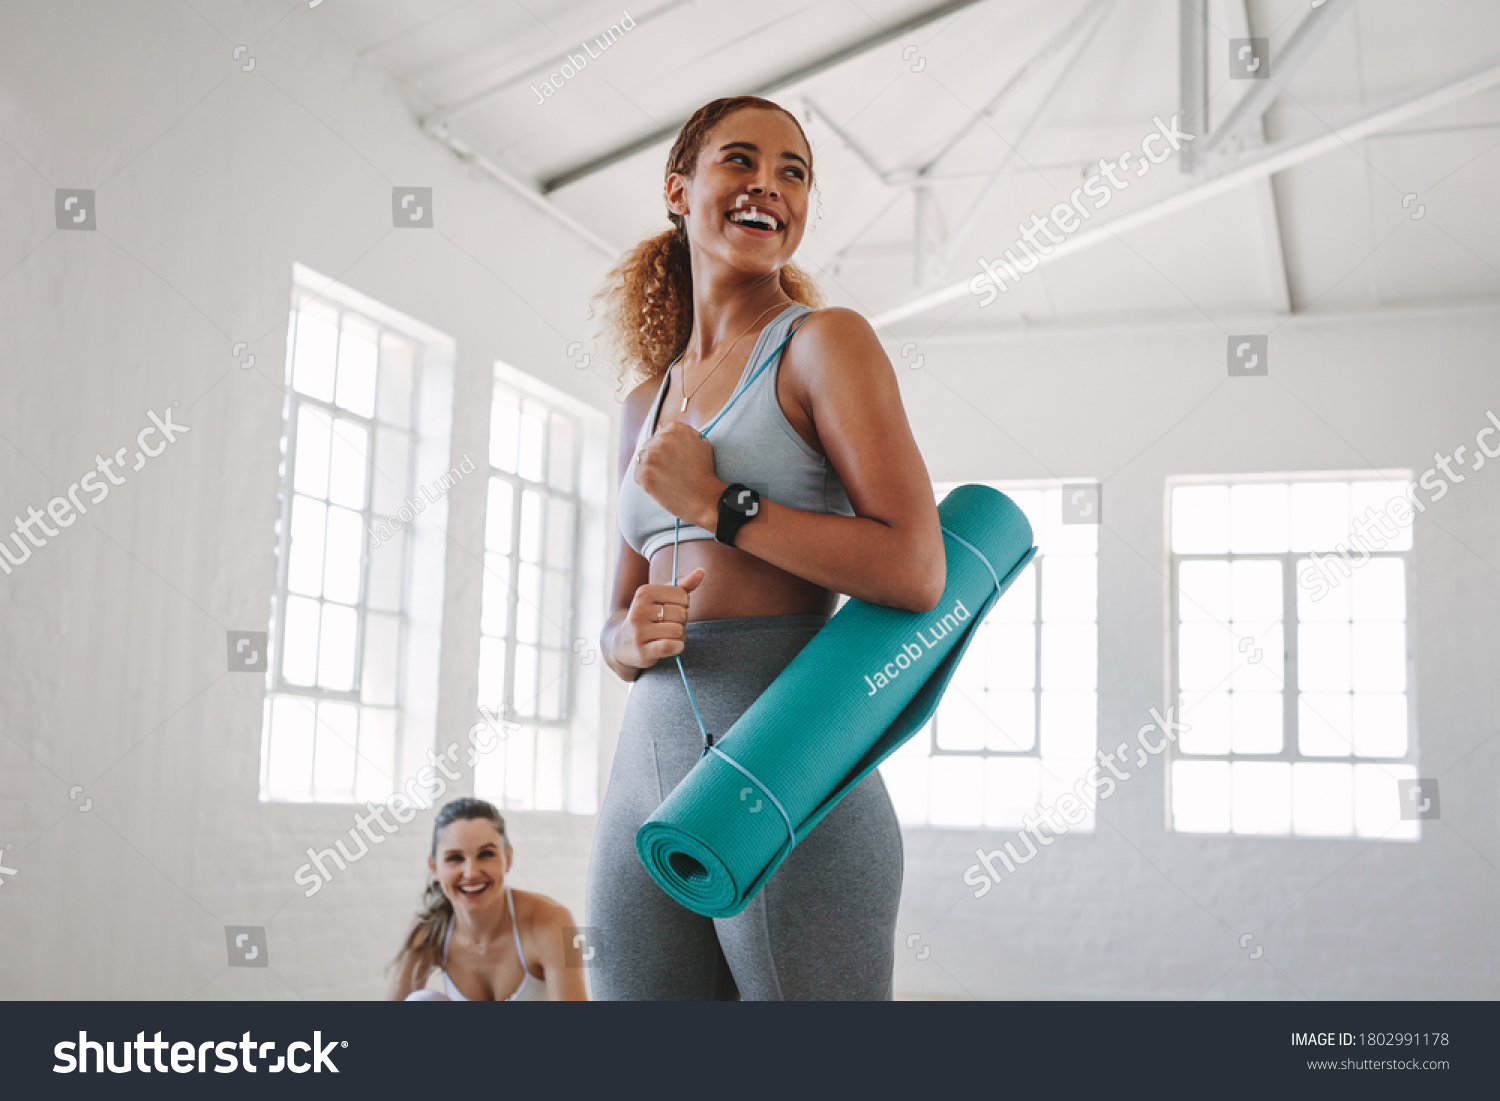 Smiling fitness woman standing in a fitness studio carrying a yoga mat. Portrait of a young woman at a fitness training centre. #1802991178